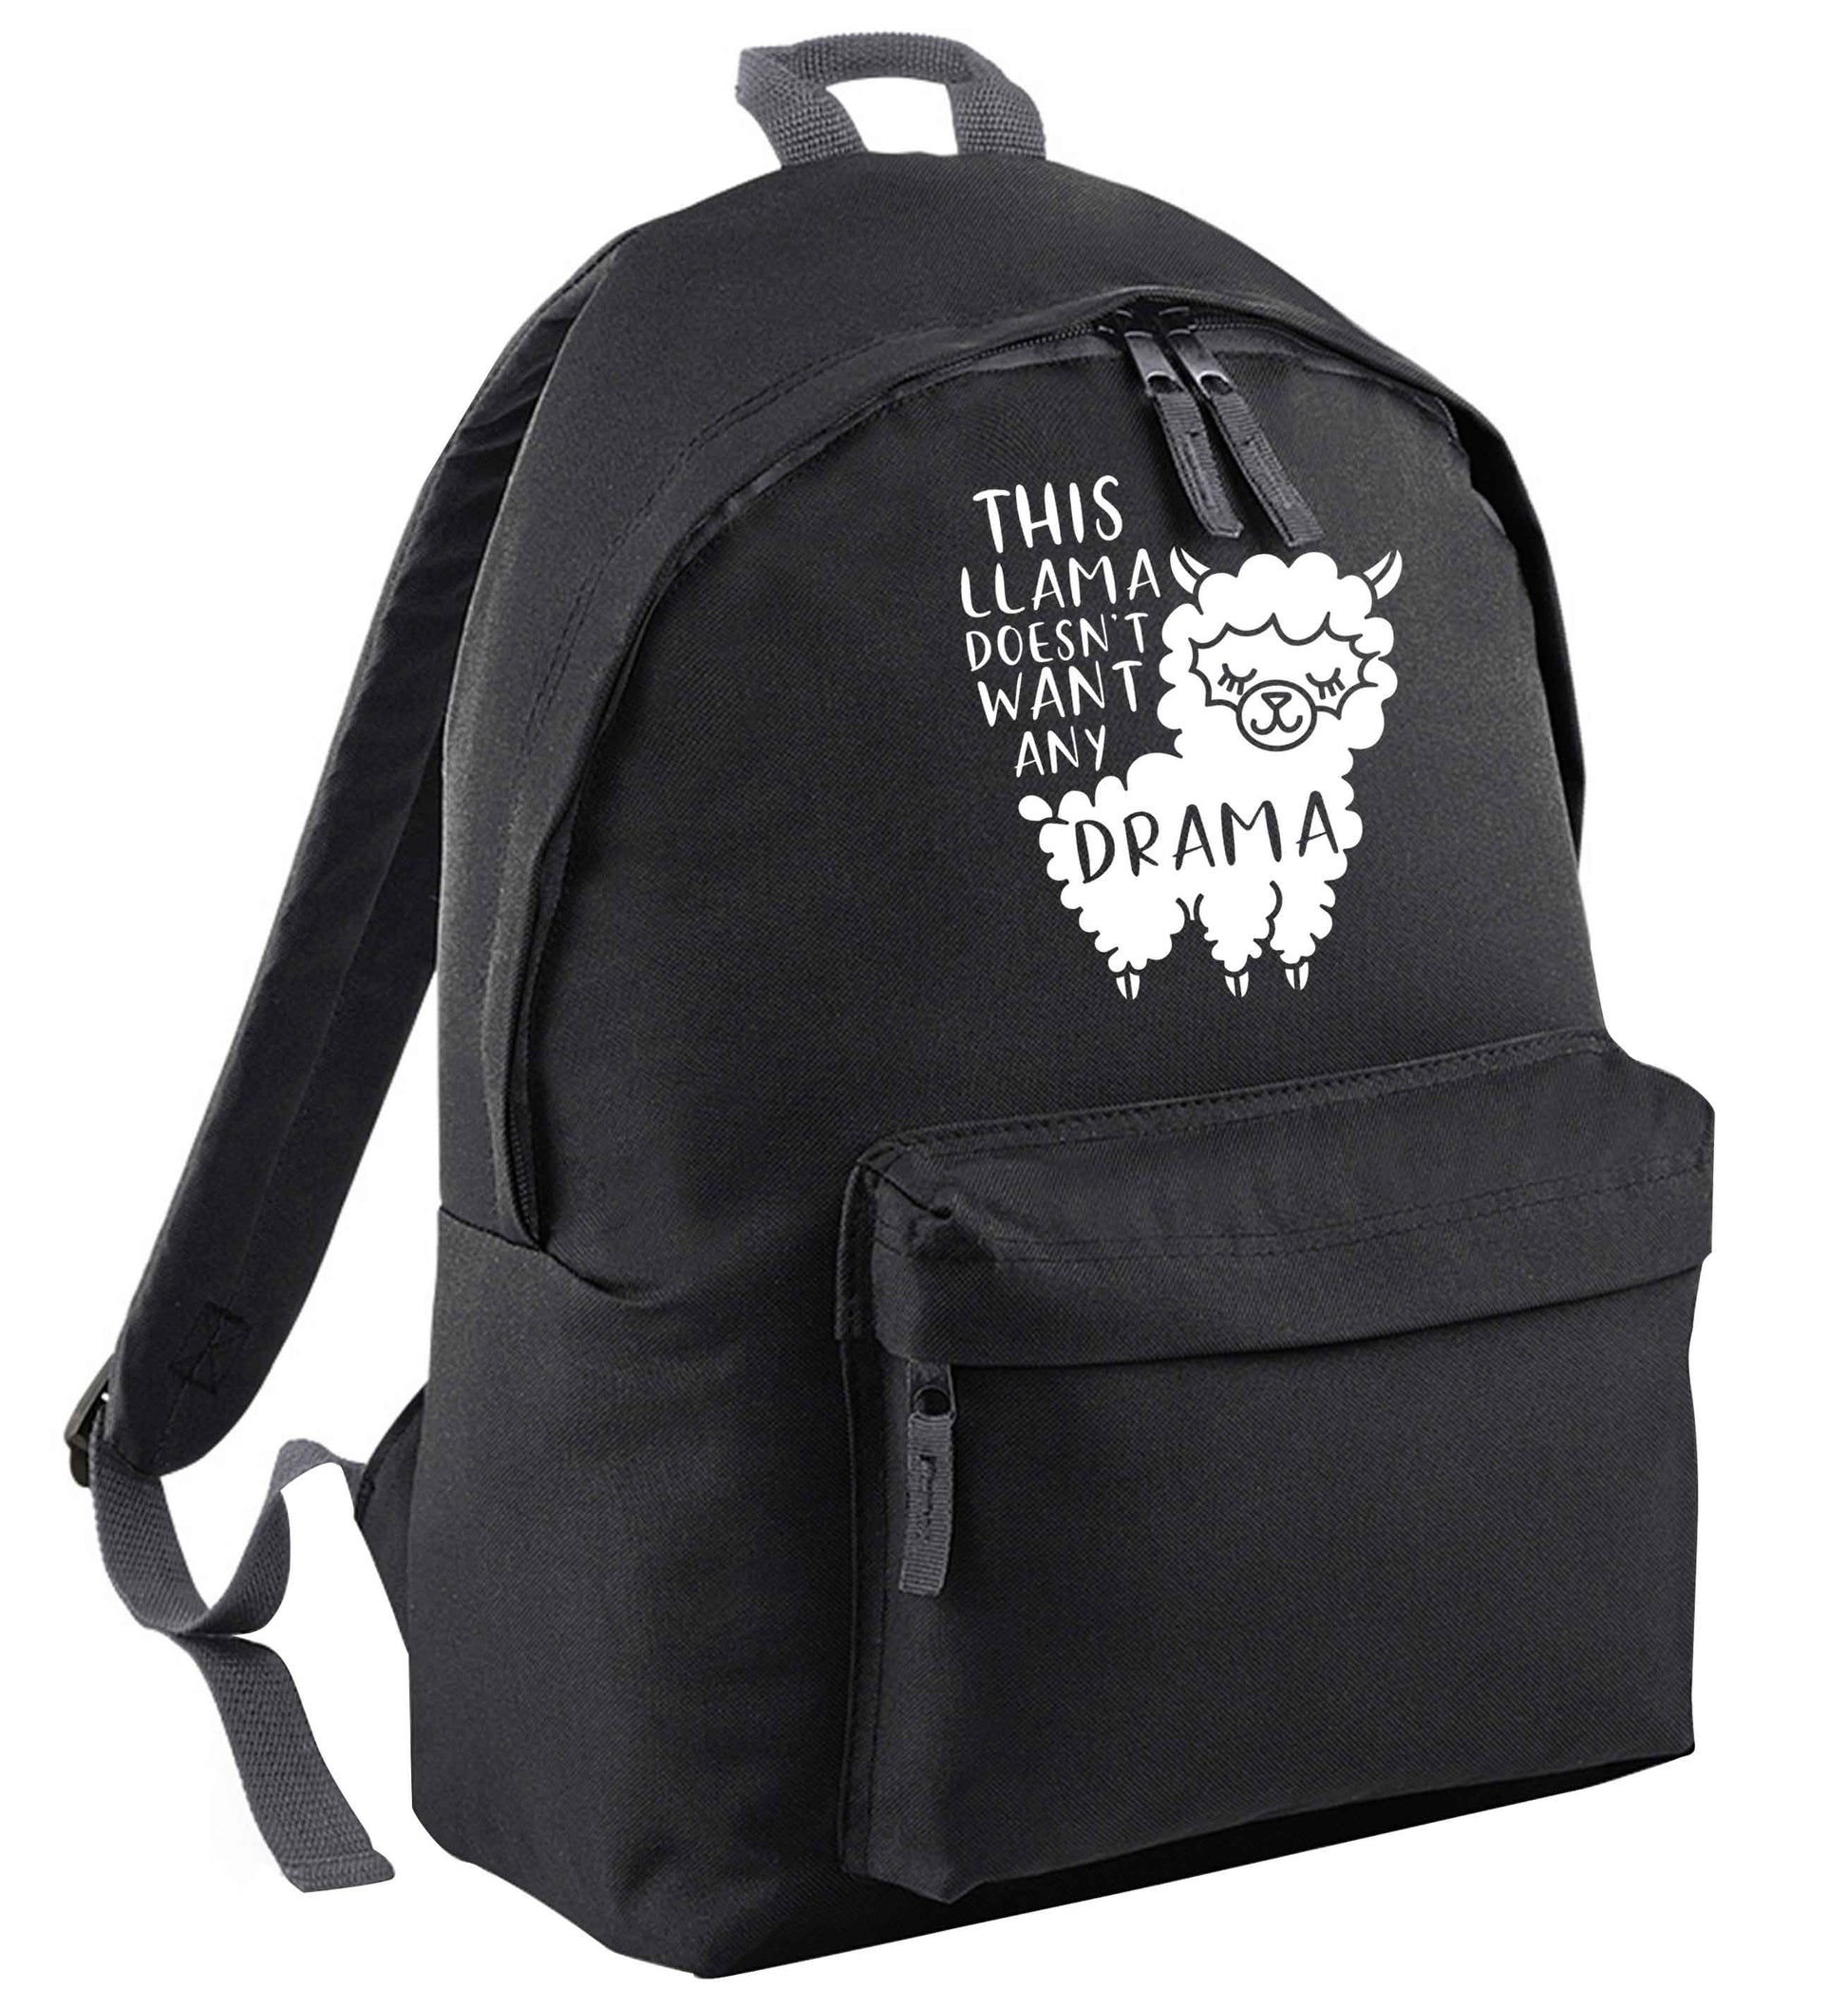 This Llama doesn't want any drama | Children's backpack